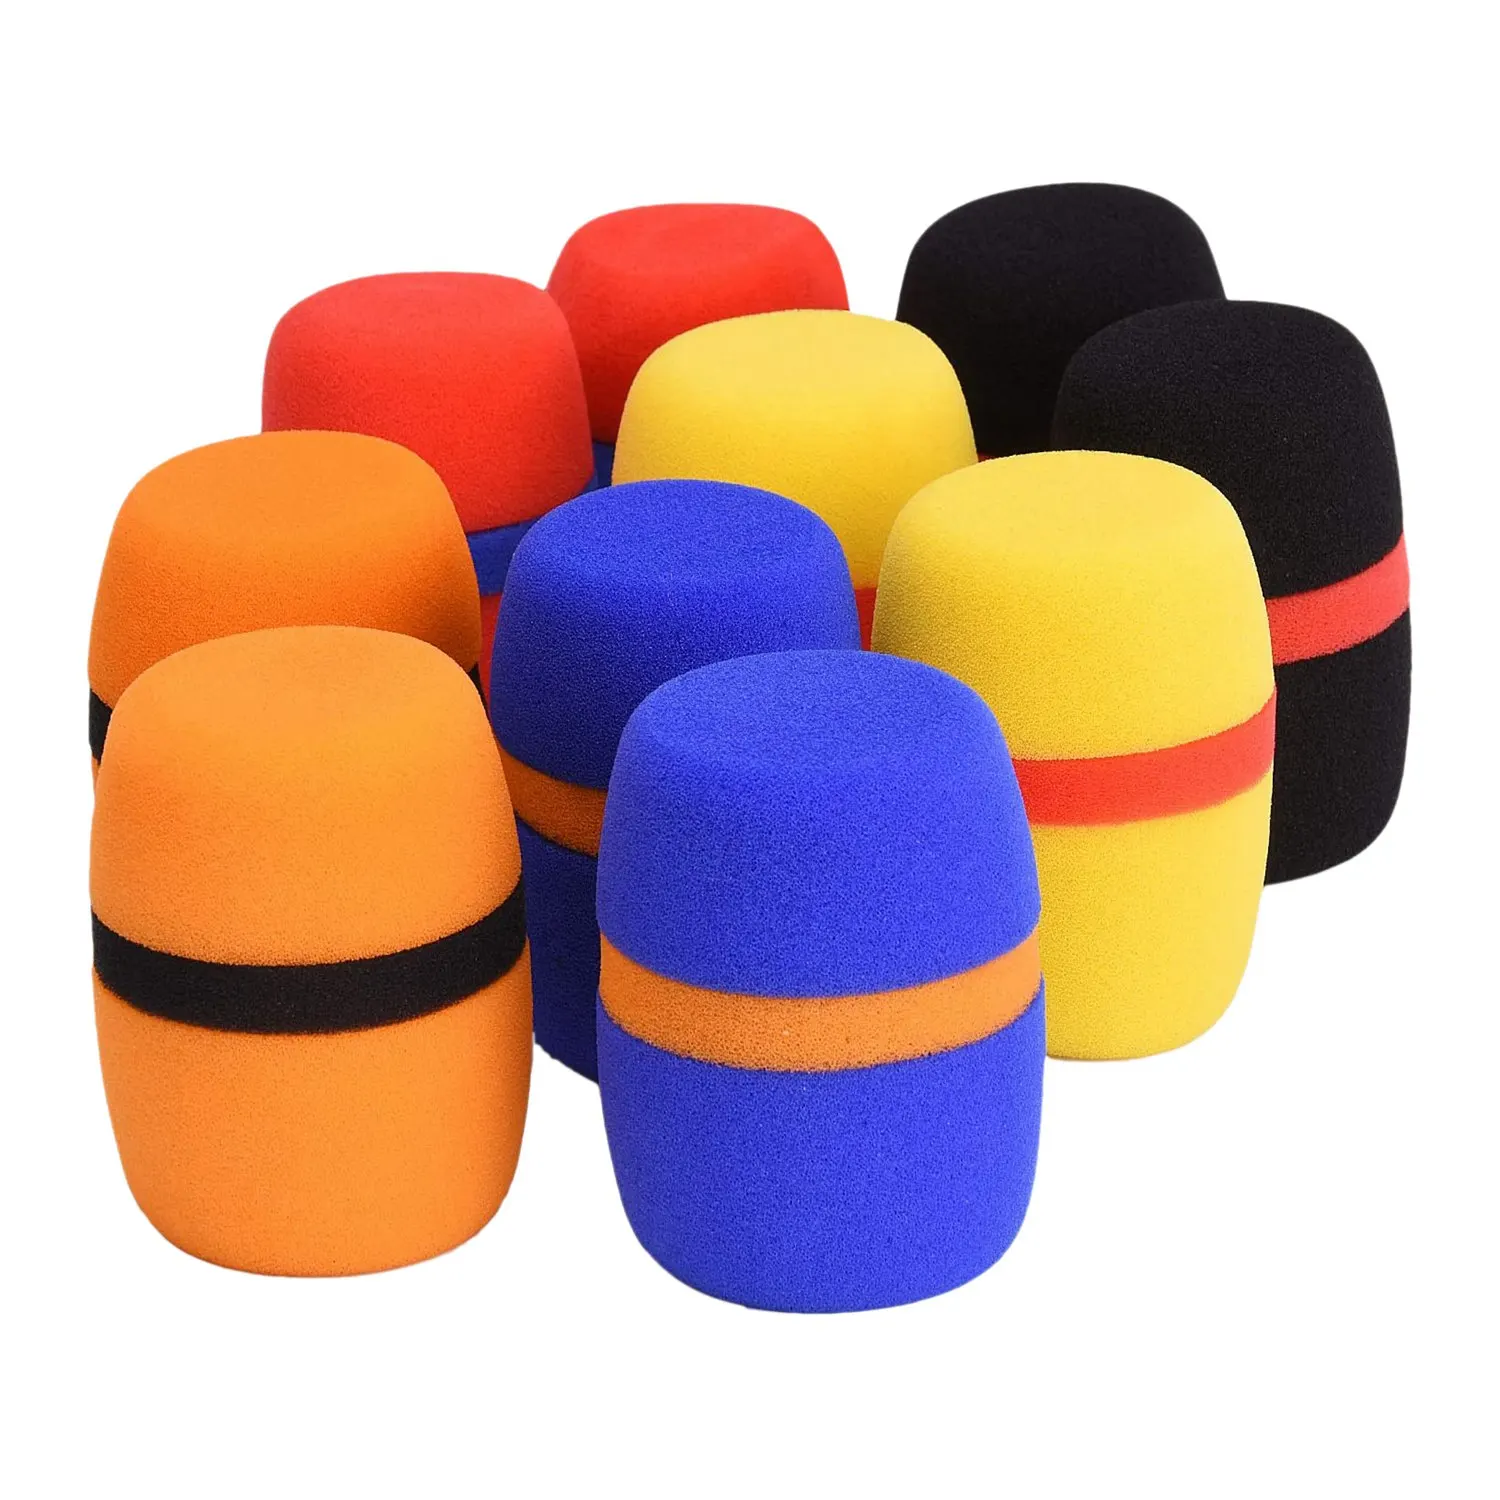 10Pcs Headset Windscreen Thickened KTV Handheld Dust Proof Soft Sponge Microphone Cover Replacement Accessories